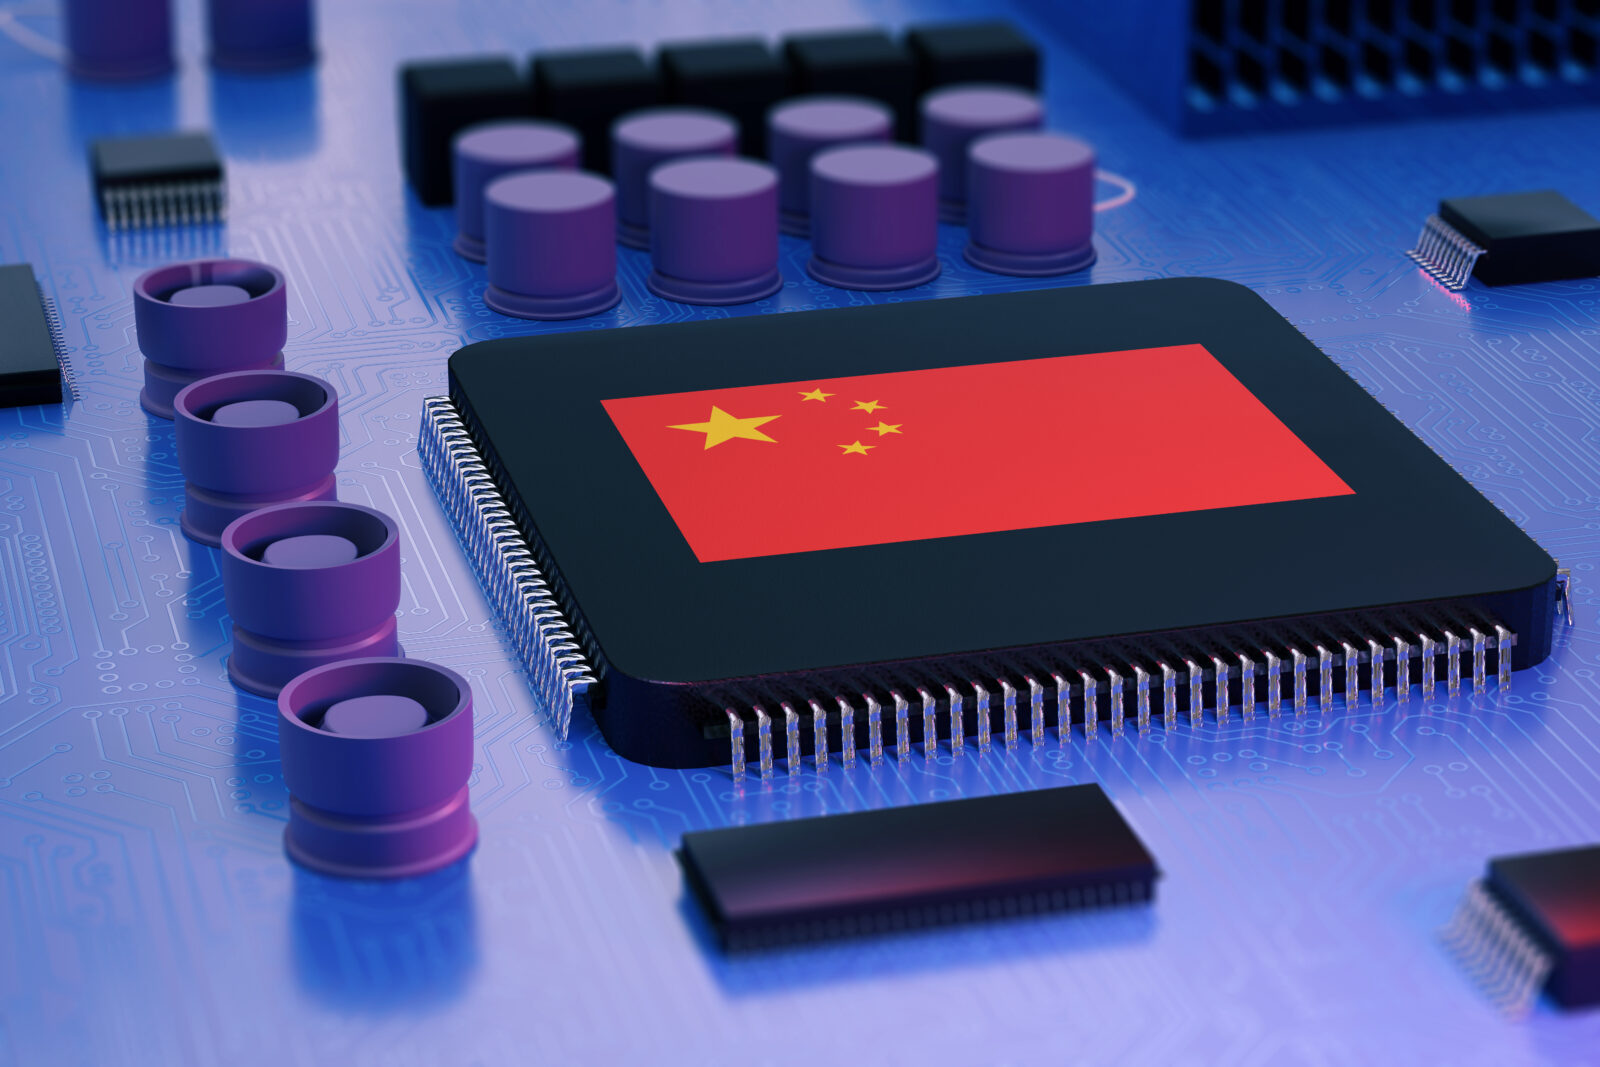 Computer chip with chinese flag, can china spy on united states. 3d conceptual illustration